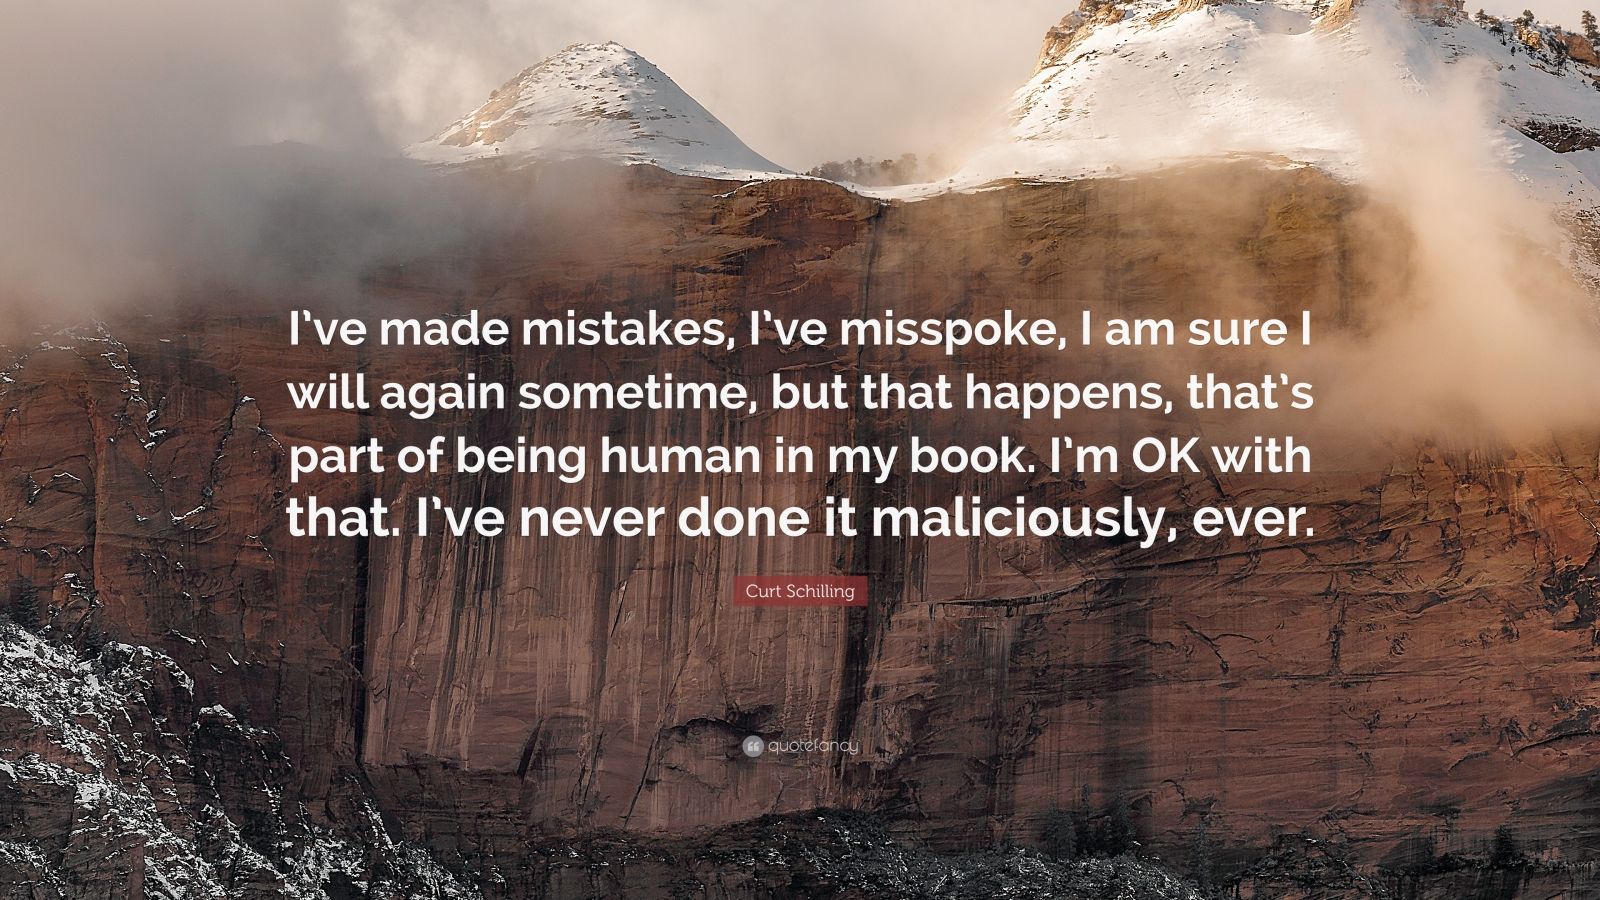 Mistakes! Curt's Blog, mistakes are a part of me 